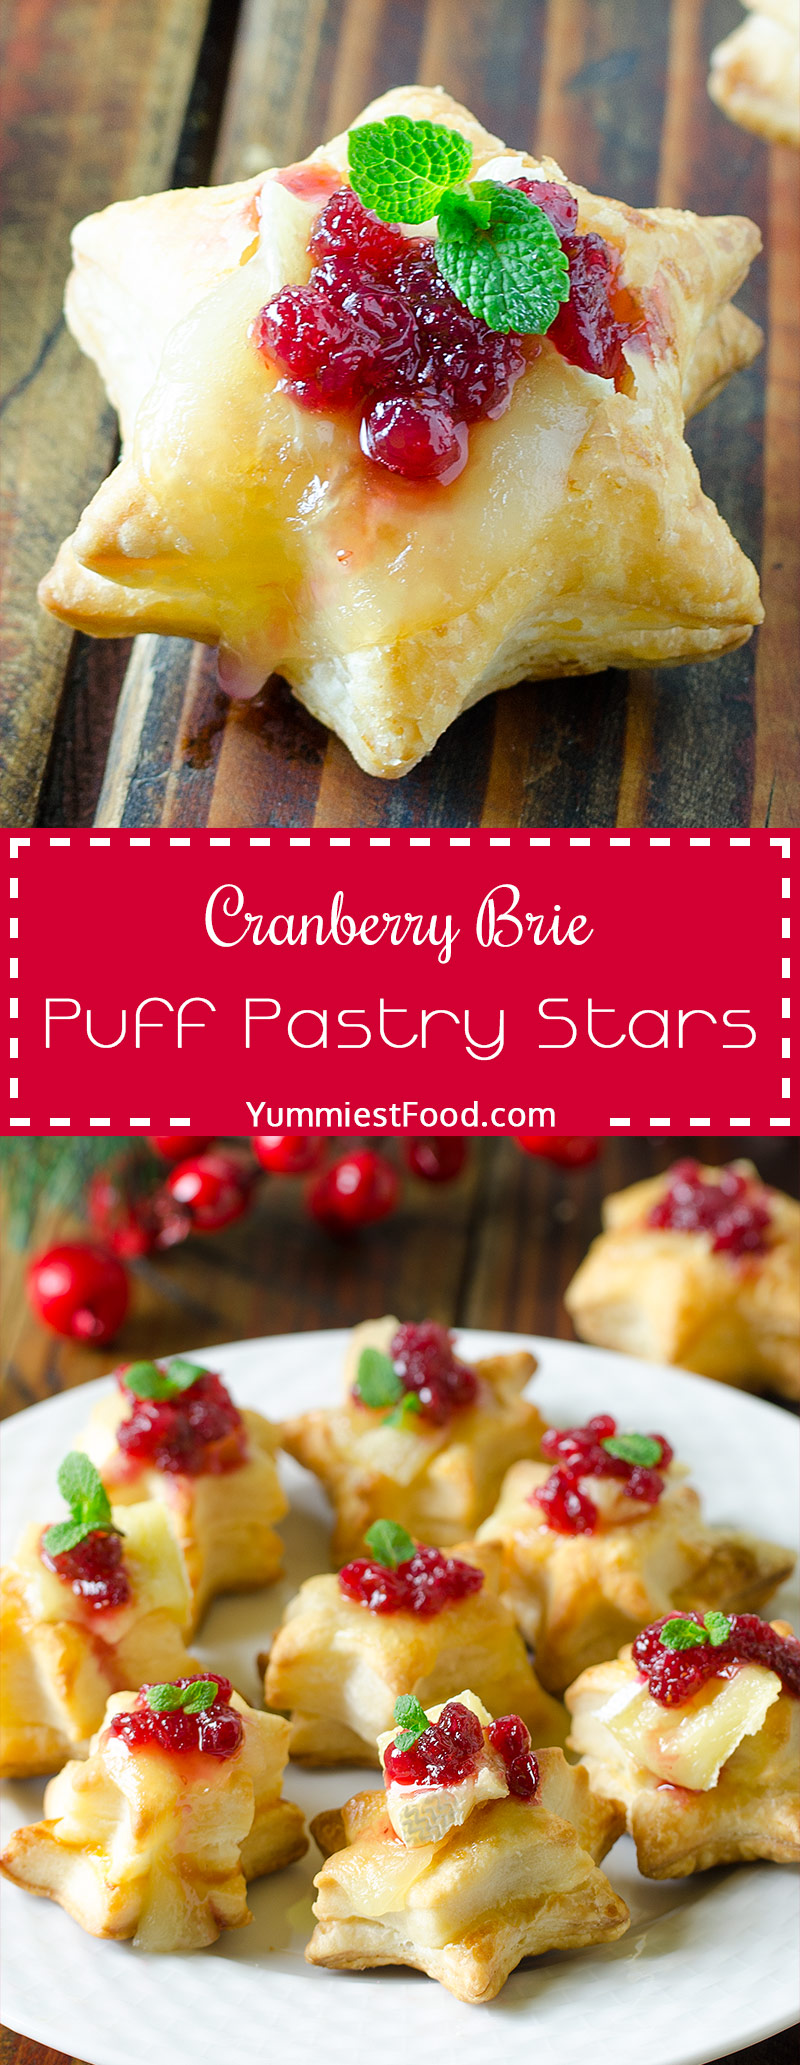 CHRISTMAS CRANBERRY BRIE PUFF PASTRY STARS – Quick and Easy appetizer perfect for Christmas! Puff pastry stars topped with brie and cranberry sauce